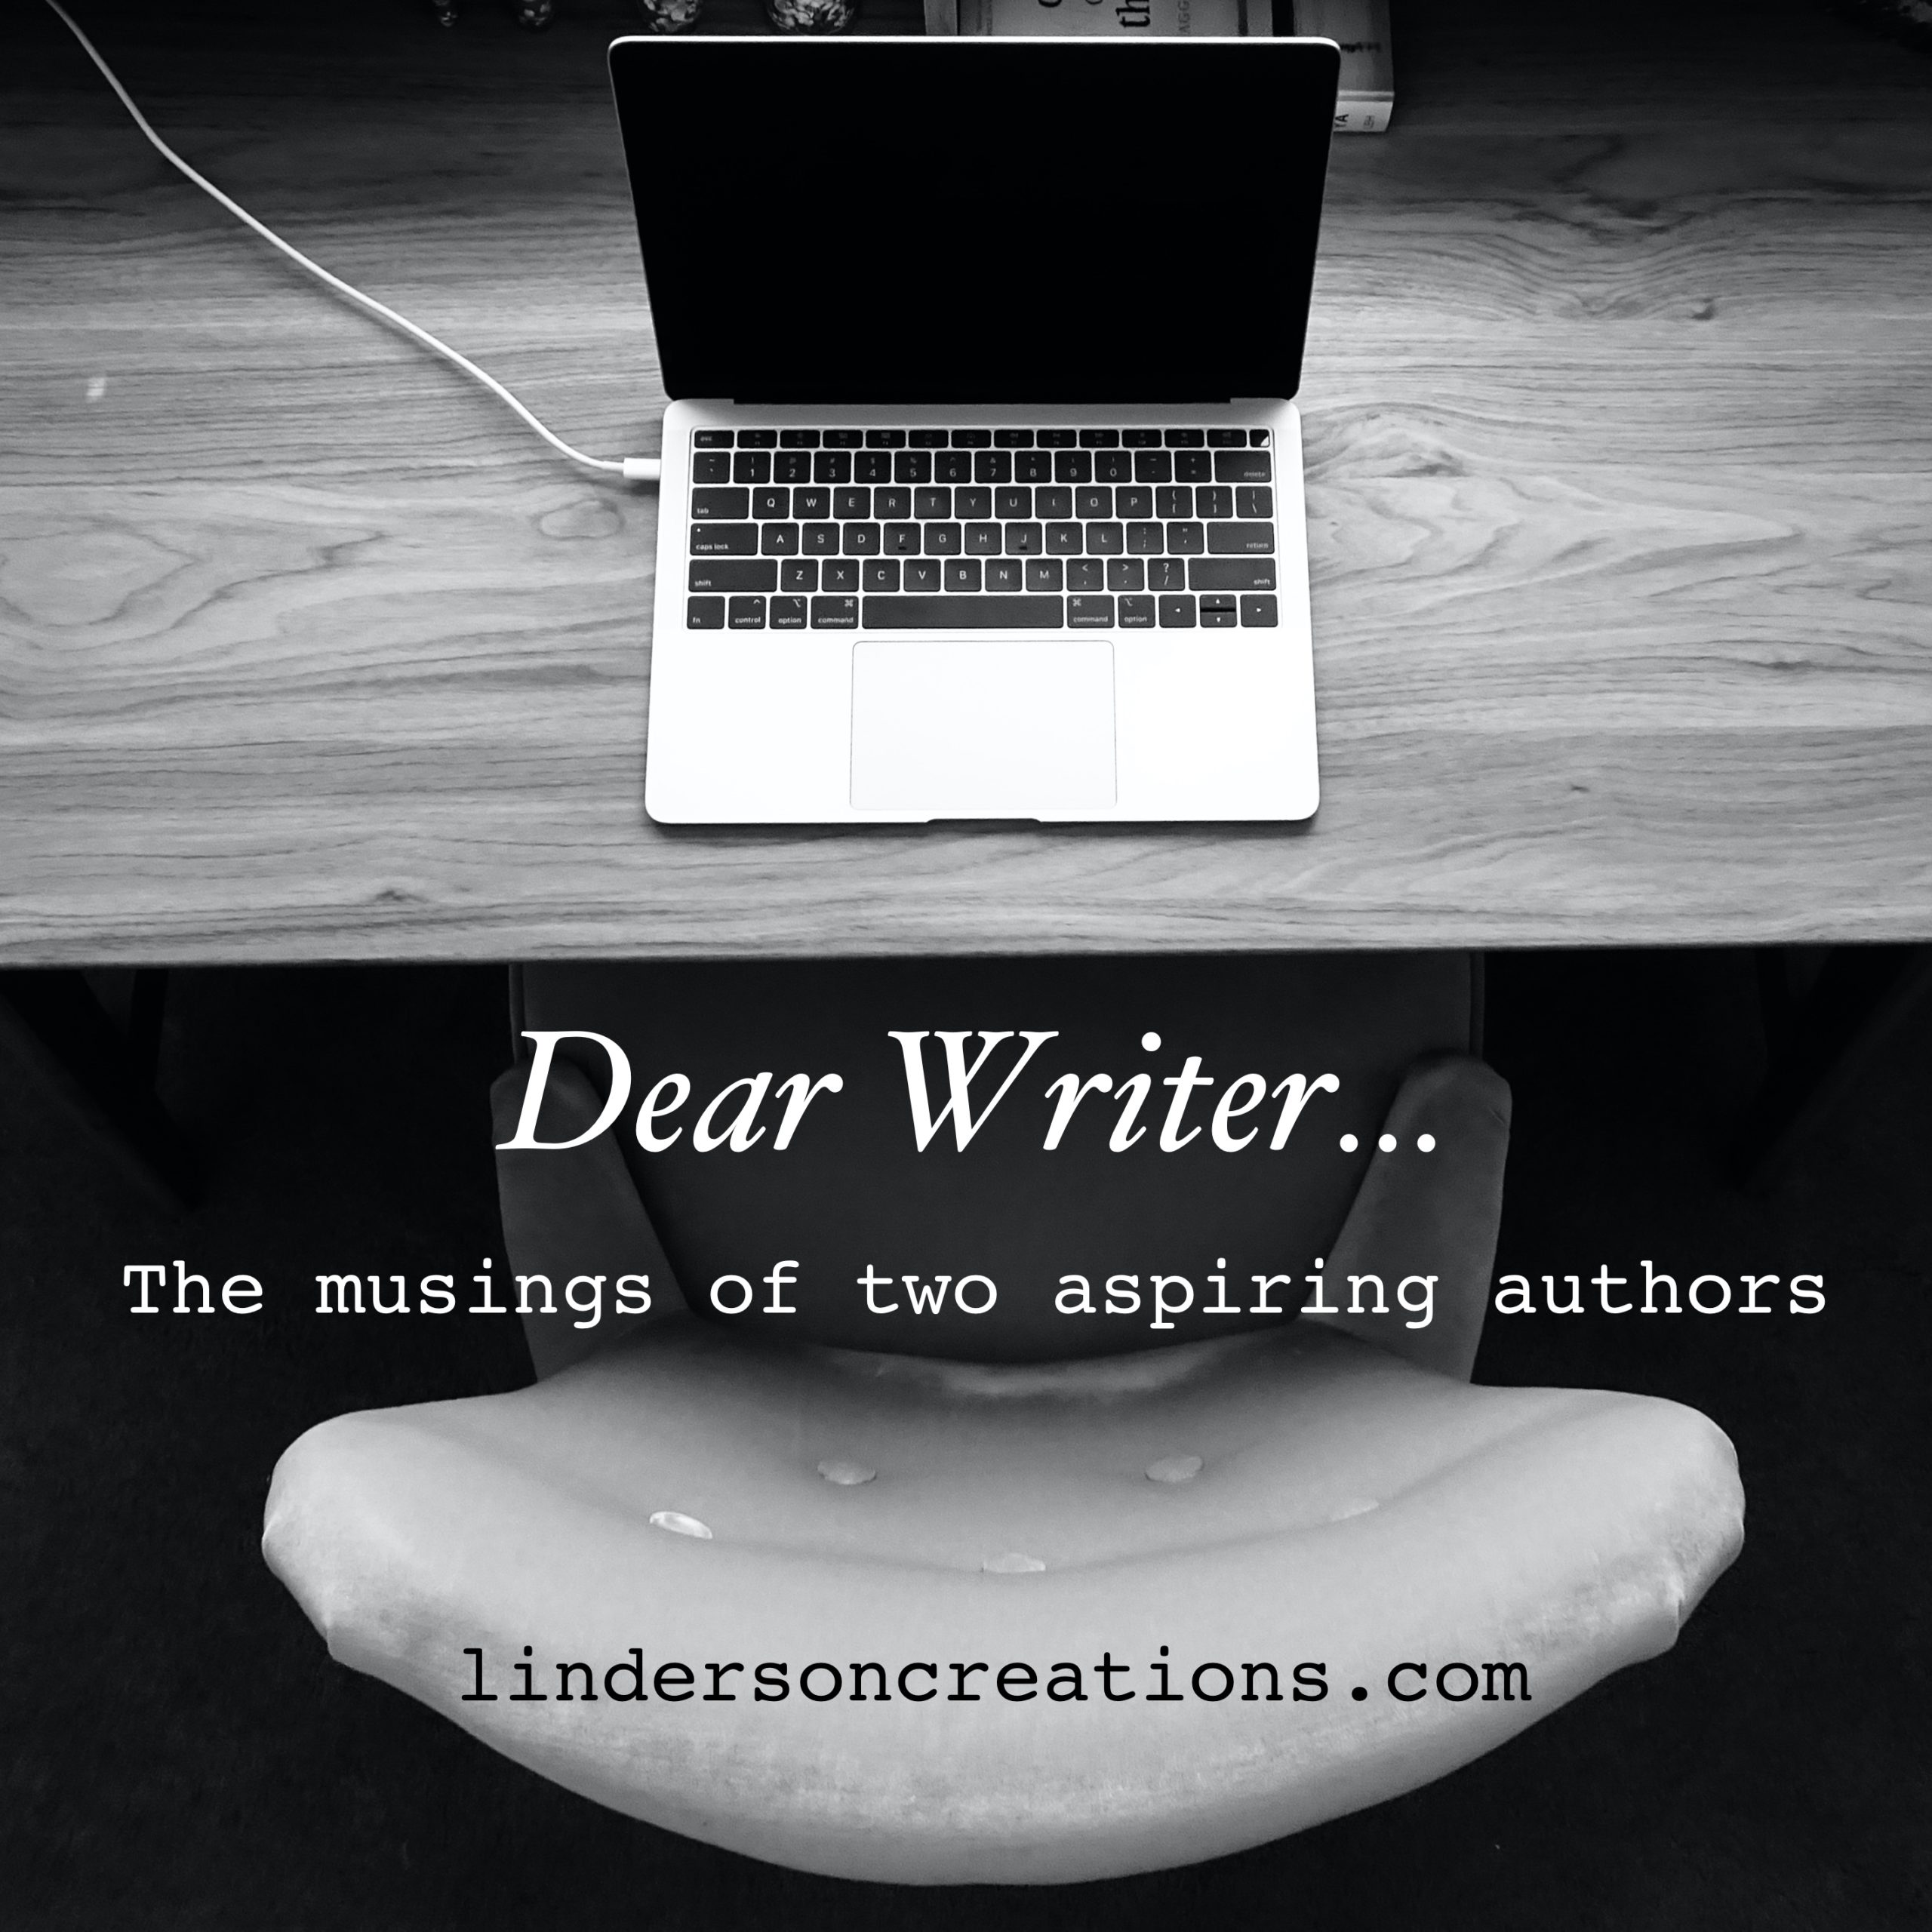 The Dear Writer Show. Image of the dear writer logo; a laptop onto of a desk and a comfy chair in front, with the words 'Dear Writer' in large print. Subheading underneath reads 'the musings of two aspiring authors'. On the curve of the chair is written lindersoncreations.com